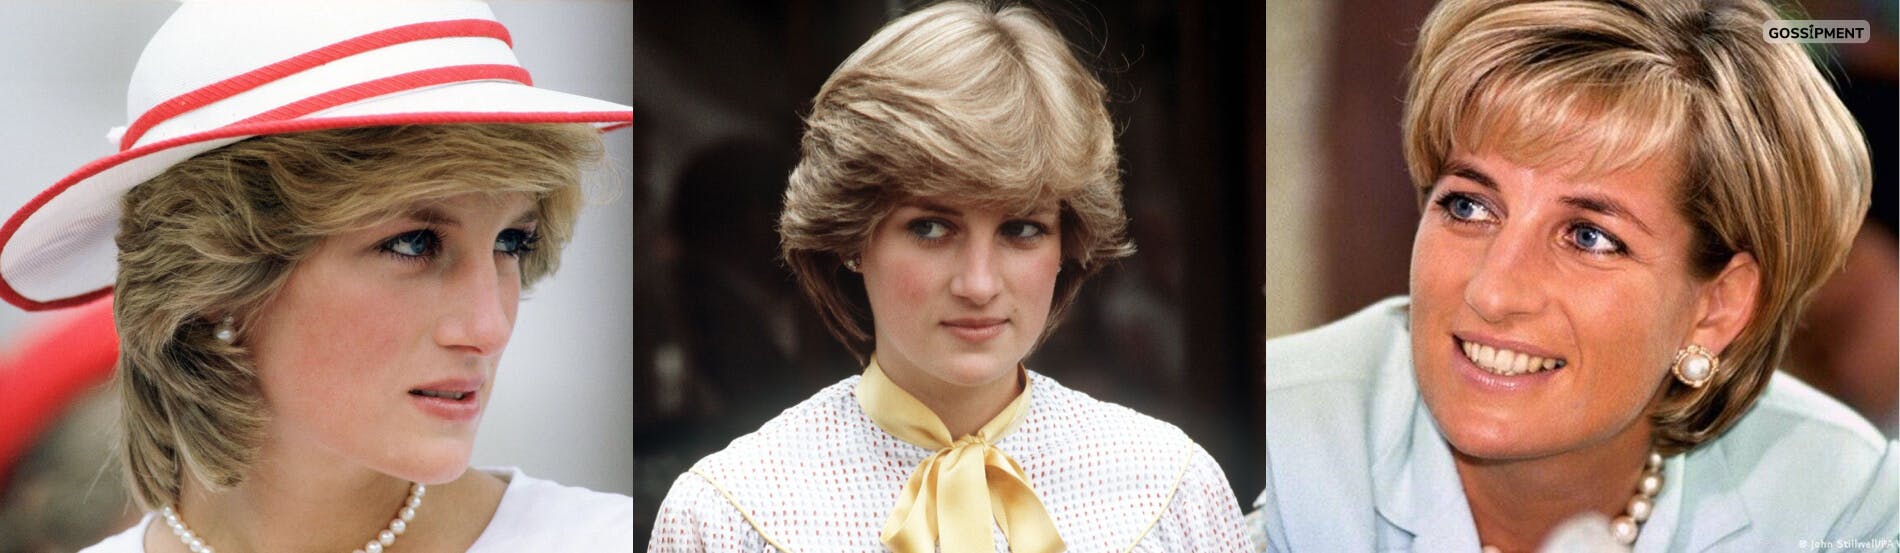 Cover Image for Princess Diana’s Death Anniversary: The Iconic Princess Lives On